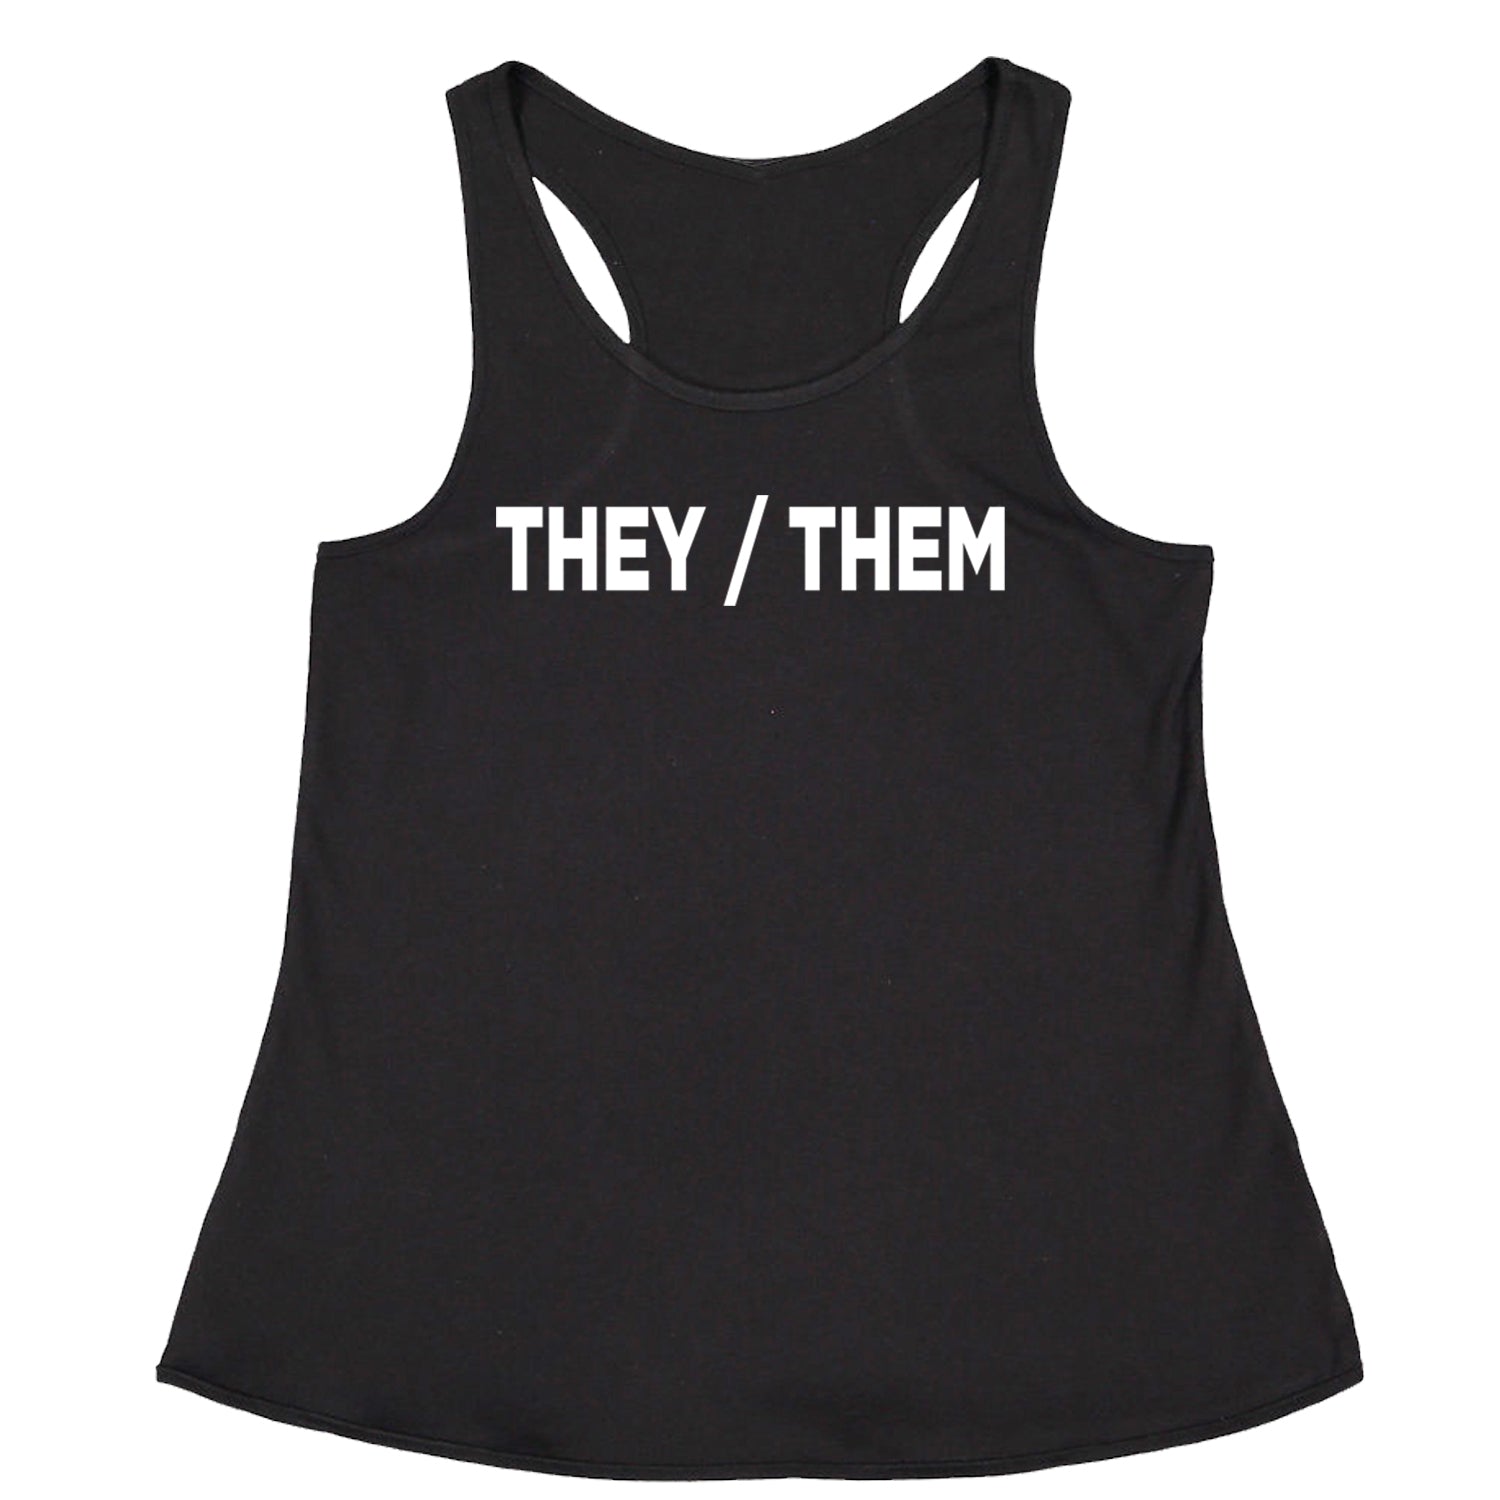 They Them Gender Pronouns Diversity and Inclusion Racerback Tank Top for Women binary, civil, gay, he, her, him, nonbinary, pride, rights, she, them, they by Expression Tees